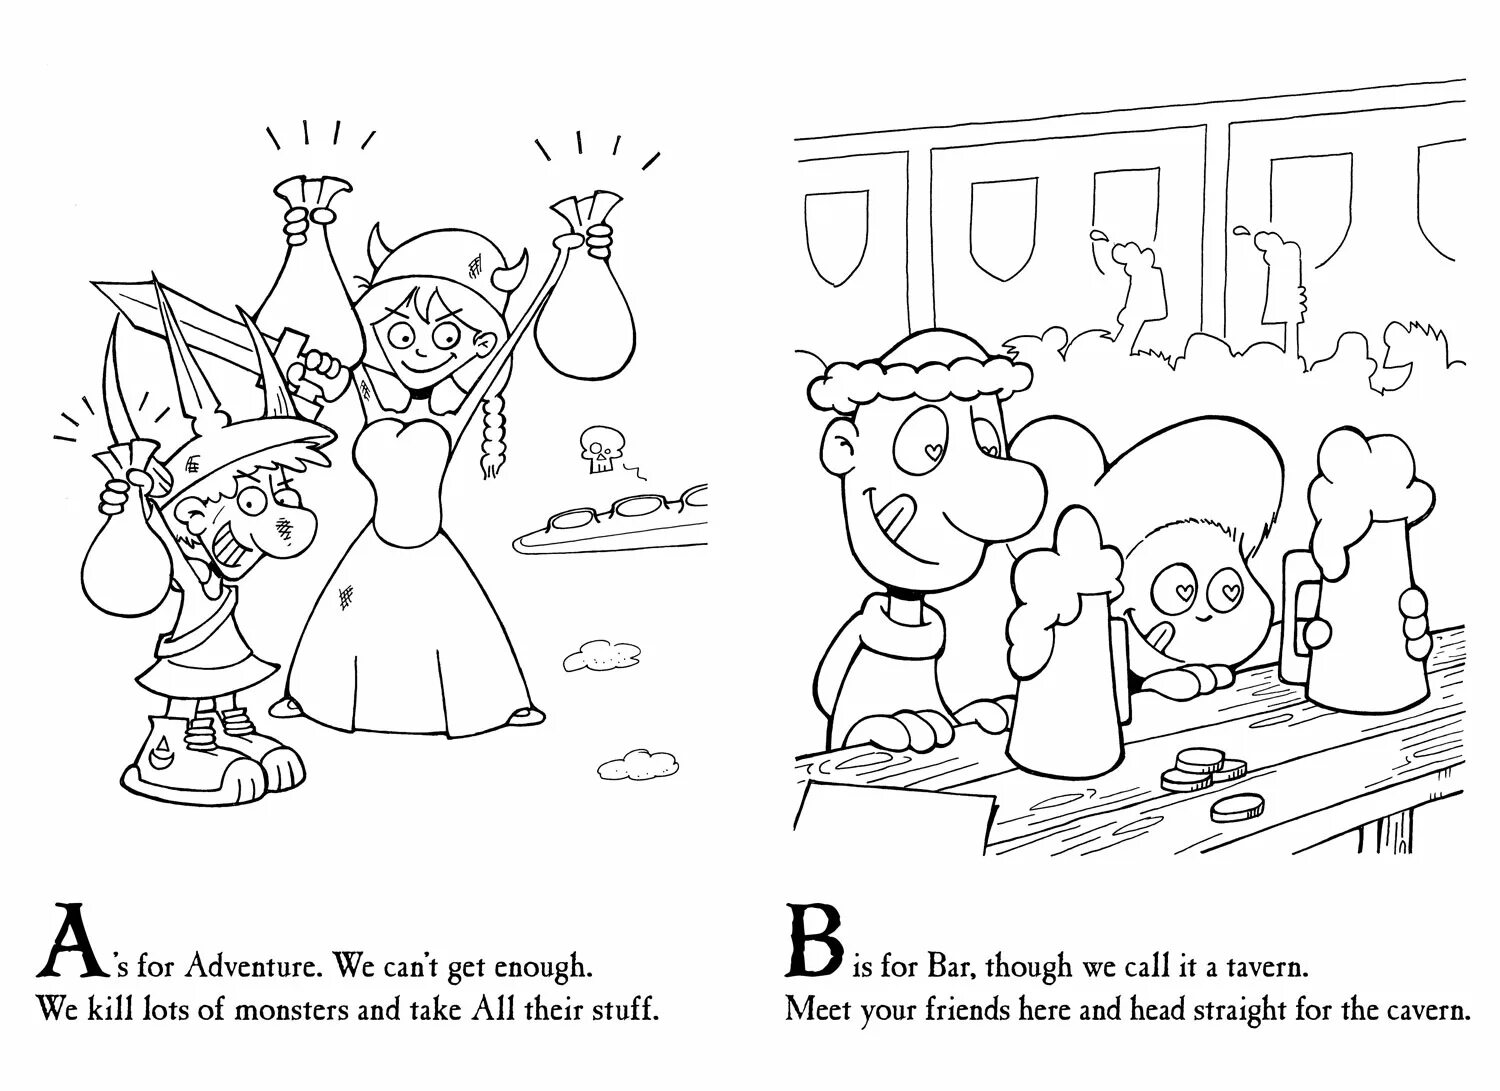 Munchkin style coloring book